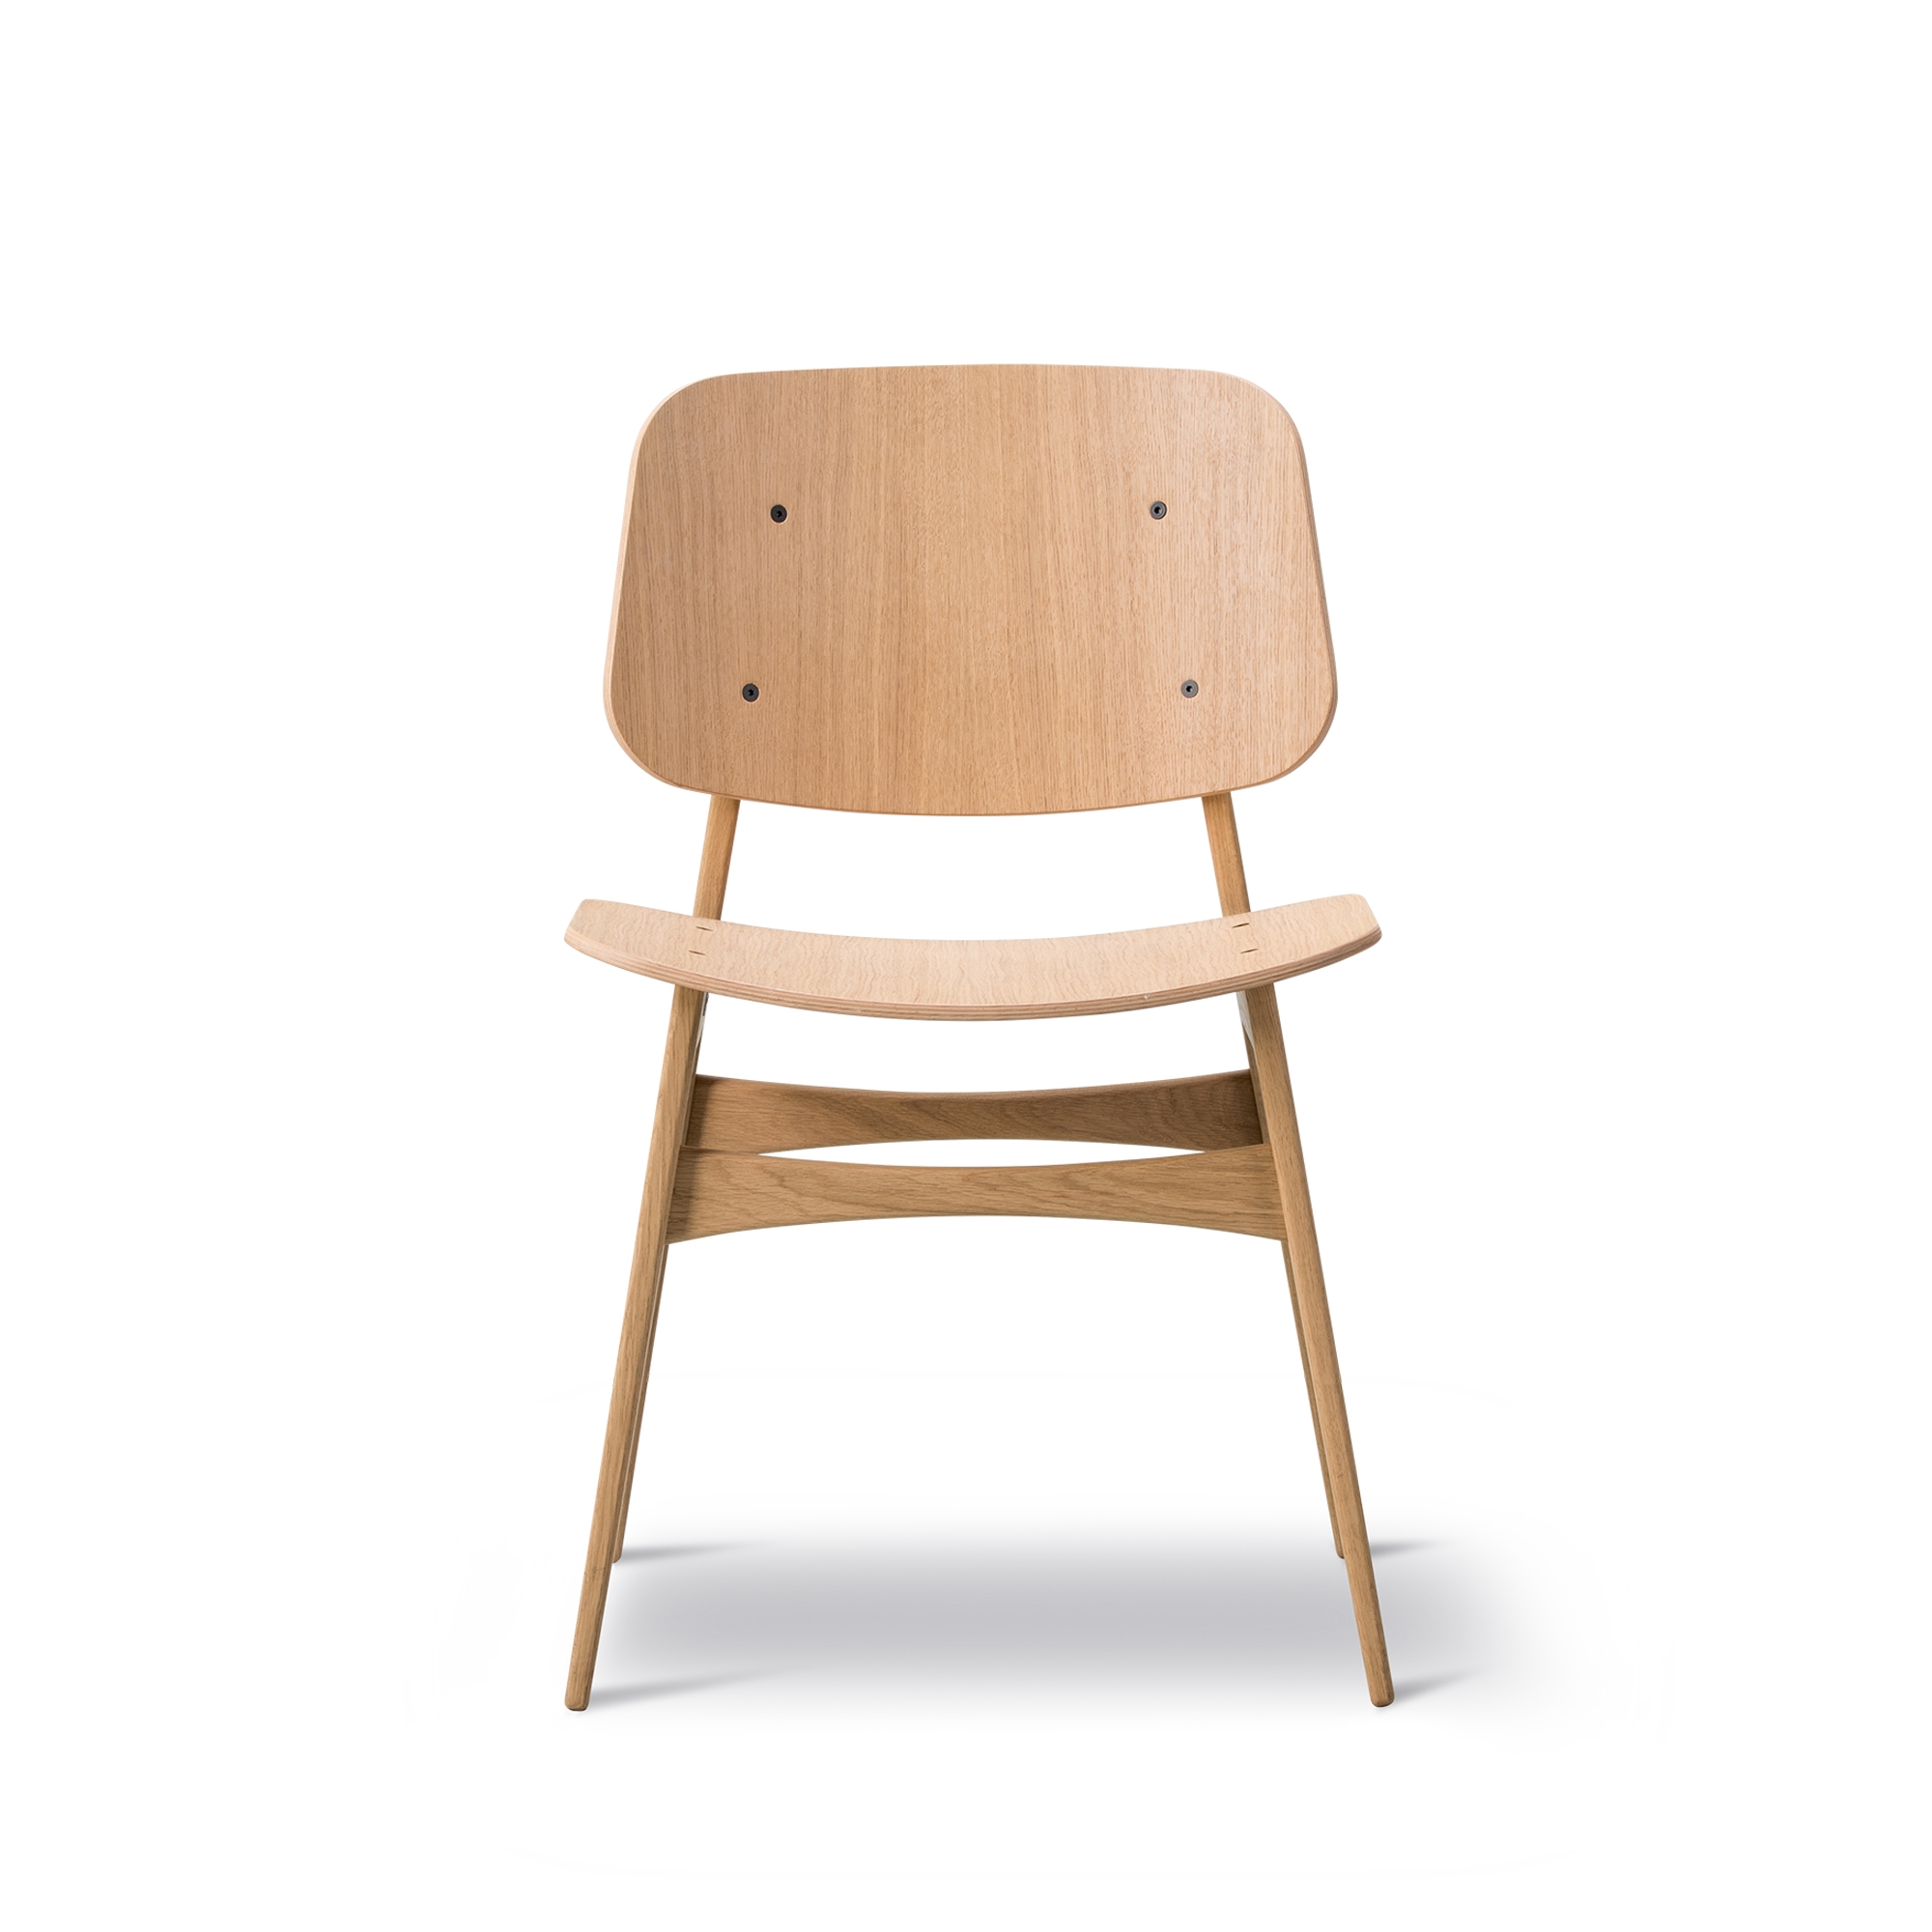 Fredericia Furniture SÃ¸borg Wood Dining Chair Lacquered Oak